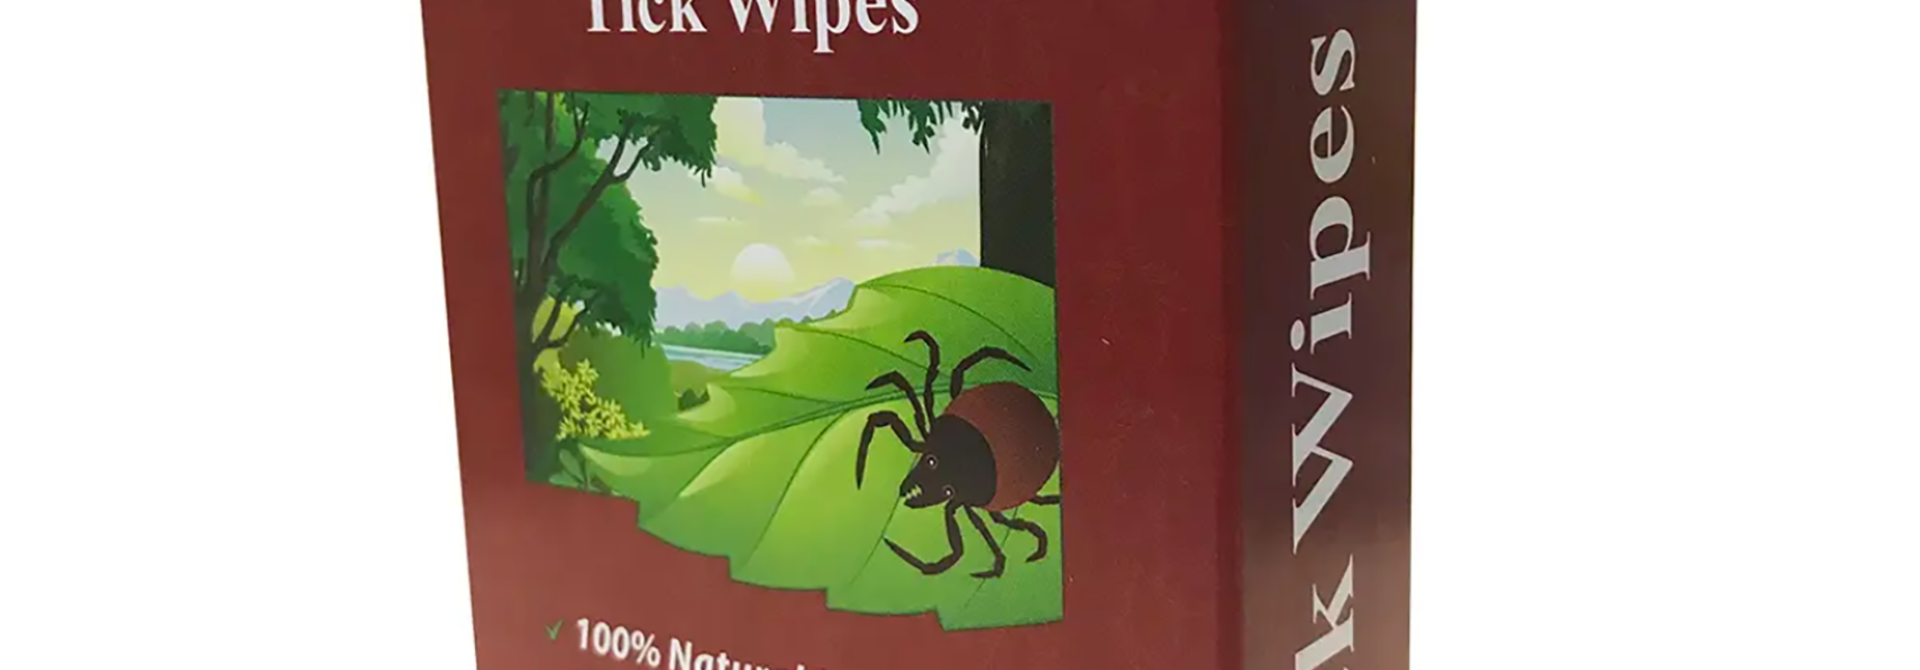 Tick Wipes - 6 pack